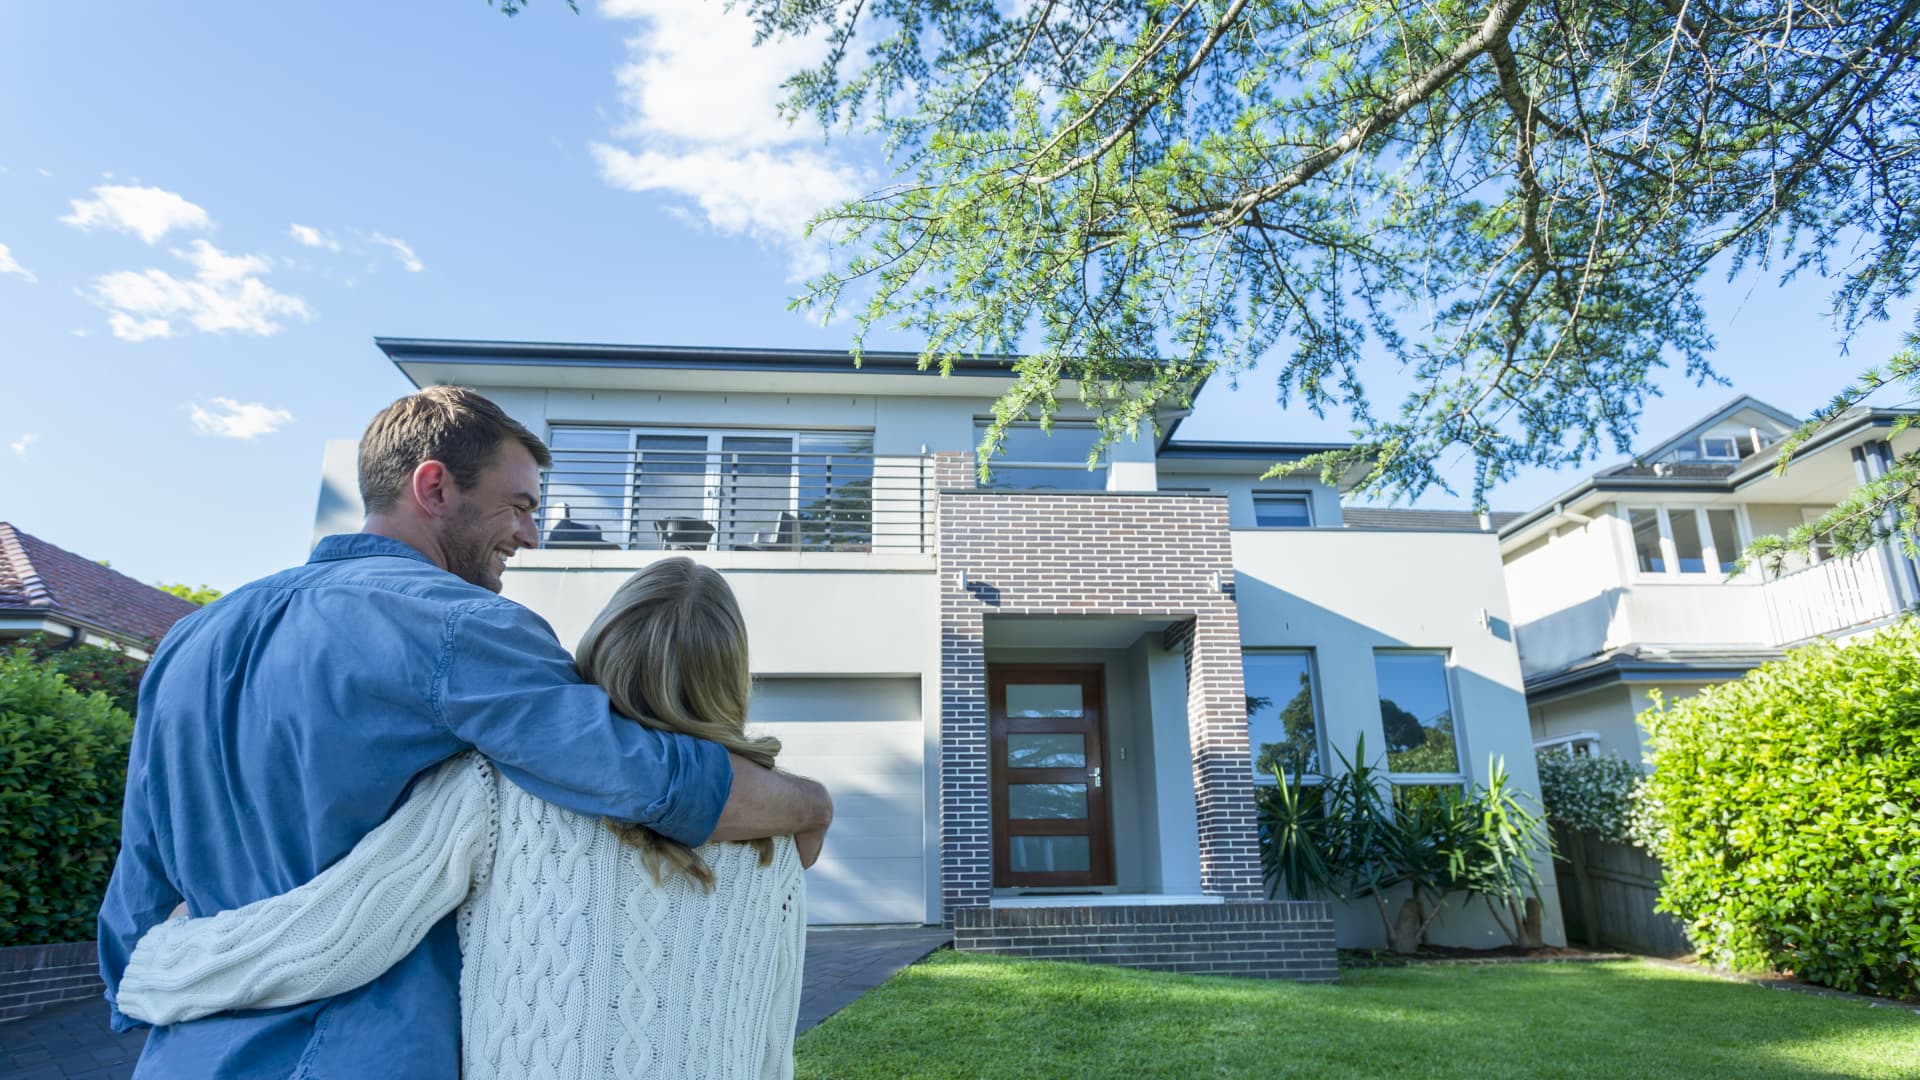 Mortgages can help you finance your first (or next) home purchase — here are 5 of the best mortgage lenders of August 2022